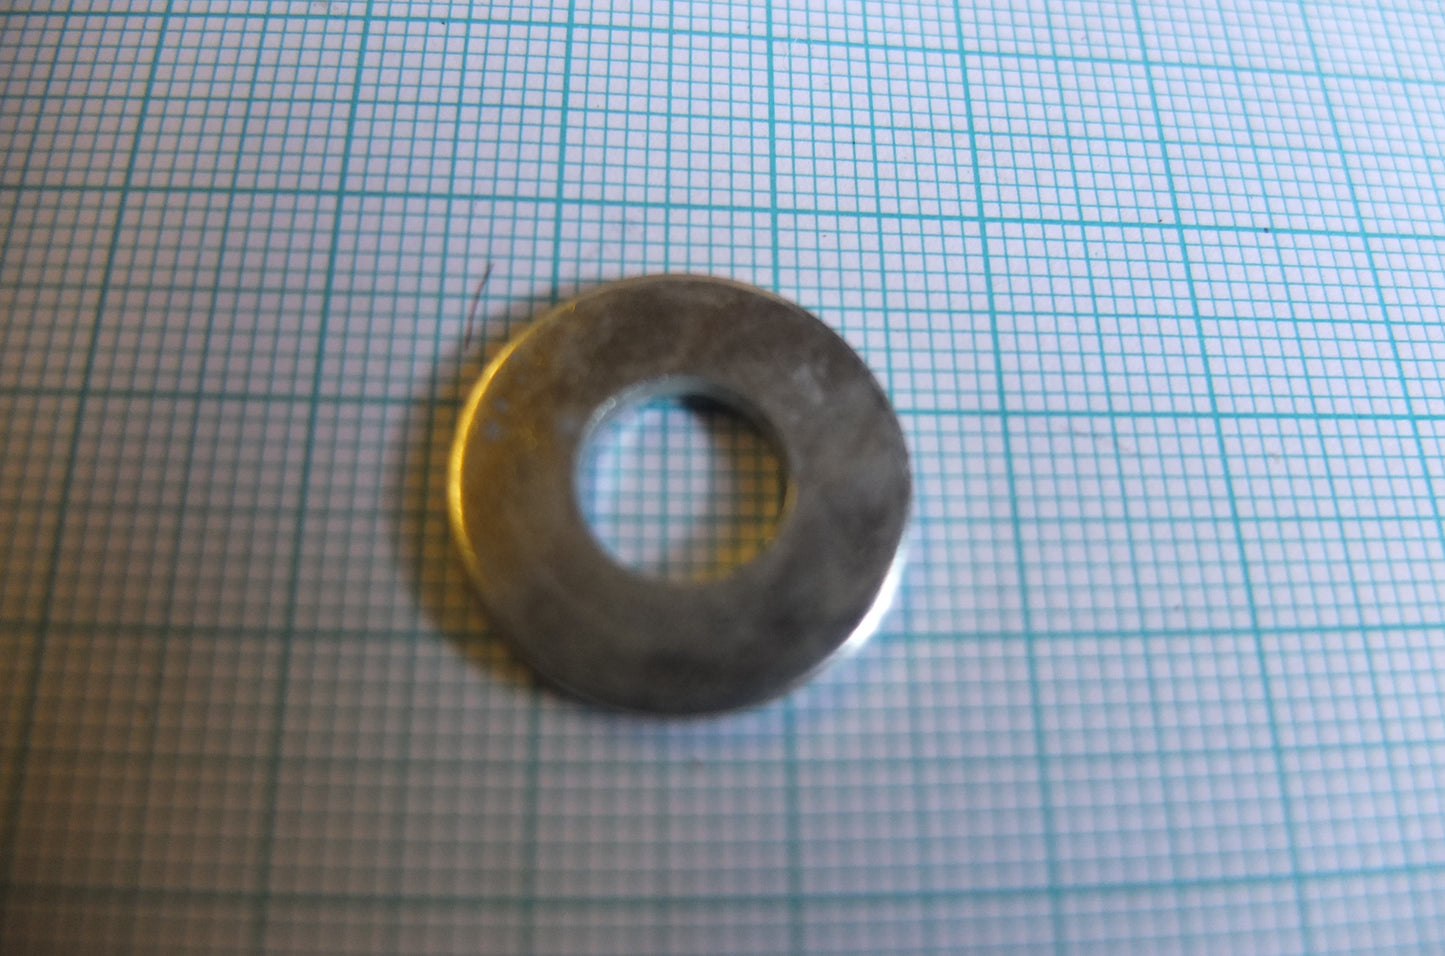 P2/025 Inspection cover nut washer